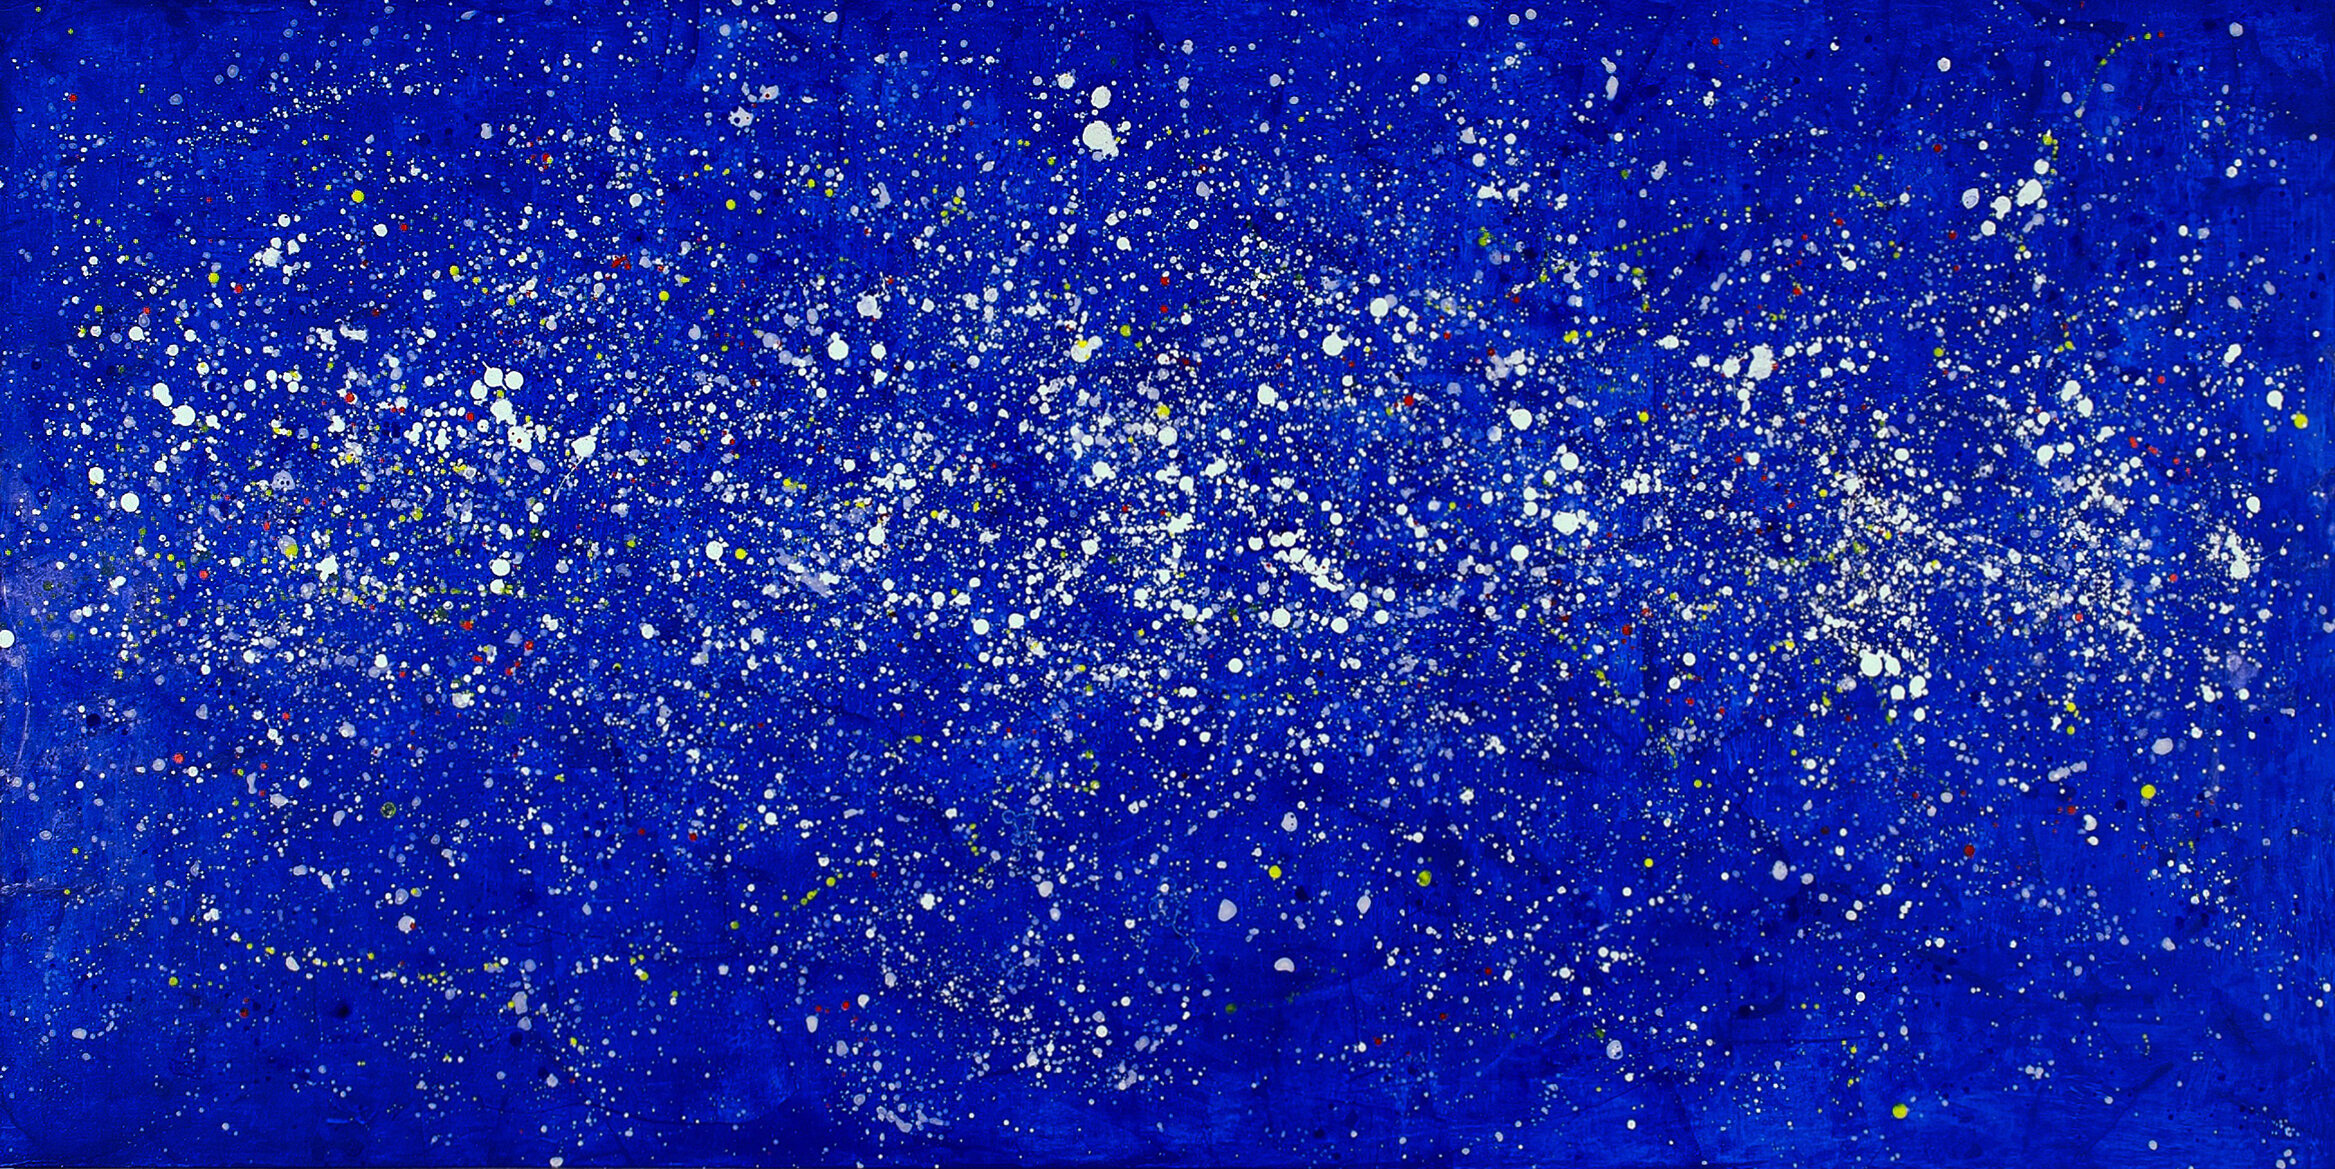   Galaxy XI , 2016, acrylic on canvas mounted on panel, 42 x 84 inches.  Private Collection, Sacramento, CA  